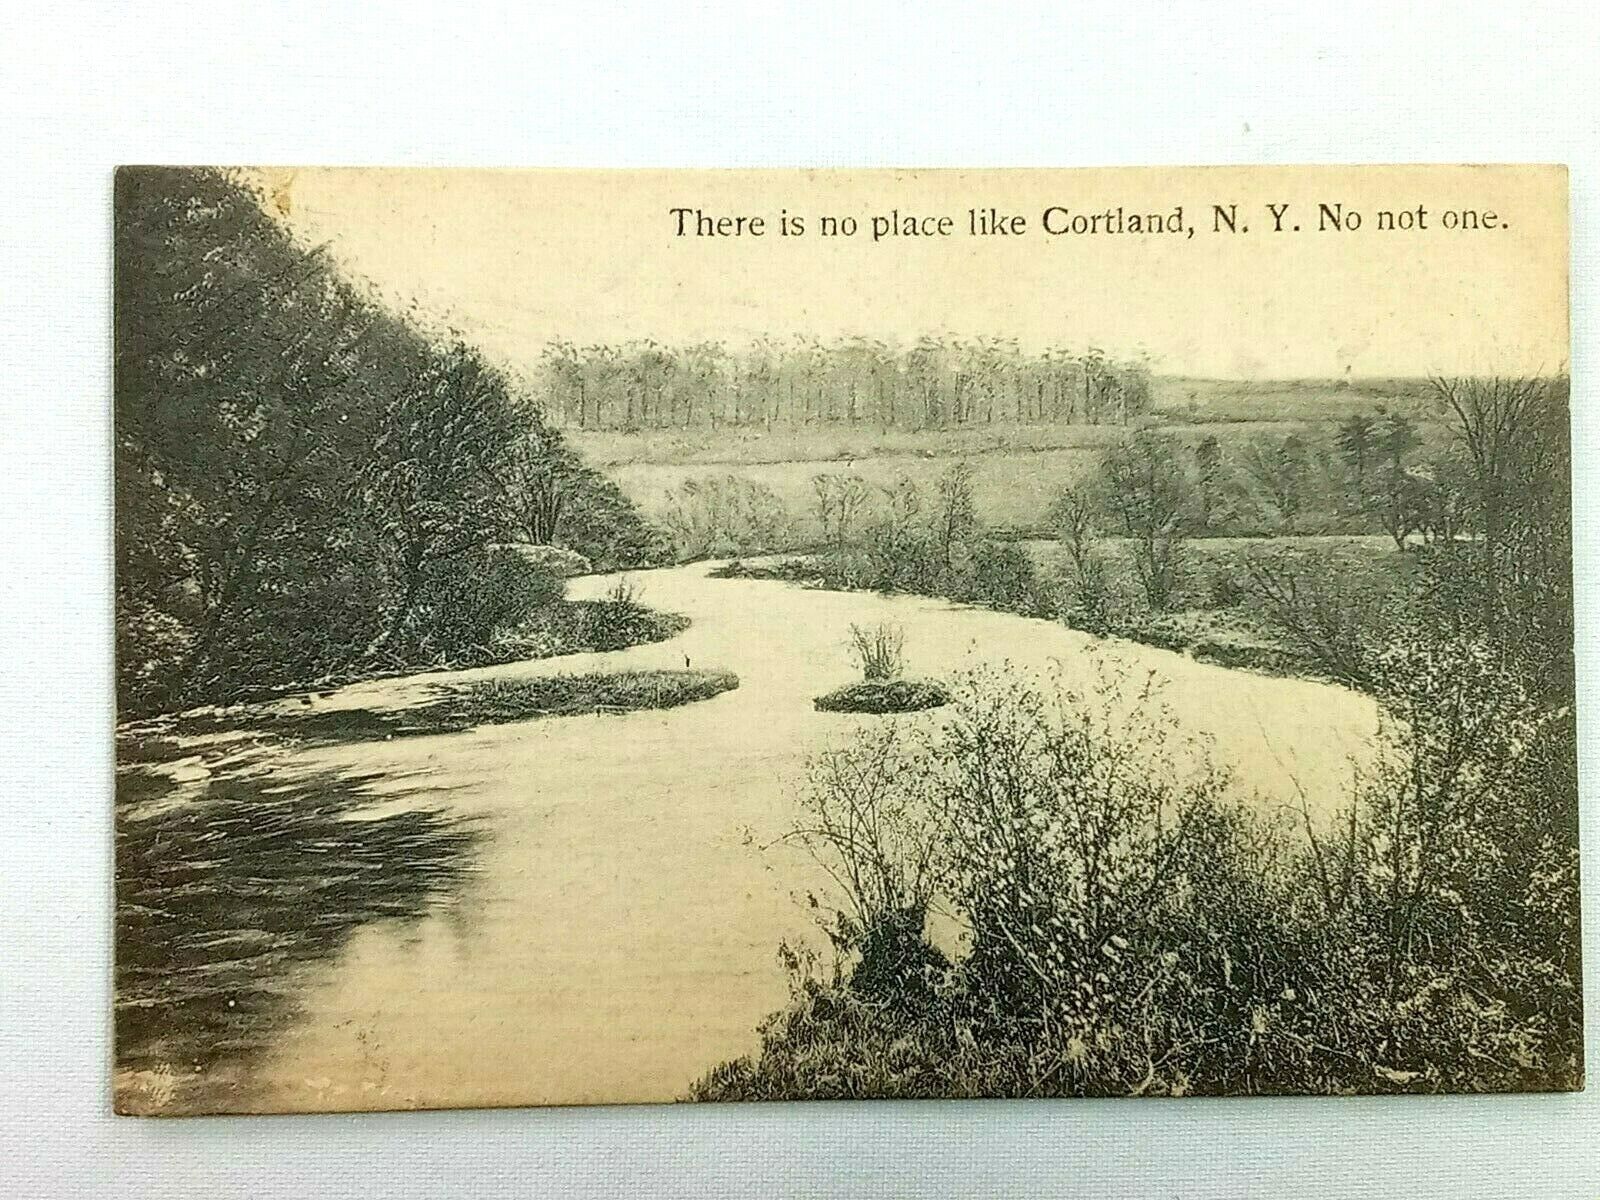 Vintage Postcard 1911 There is no place like Cortland NY No not one. Water Scene